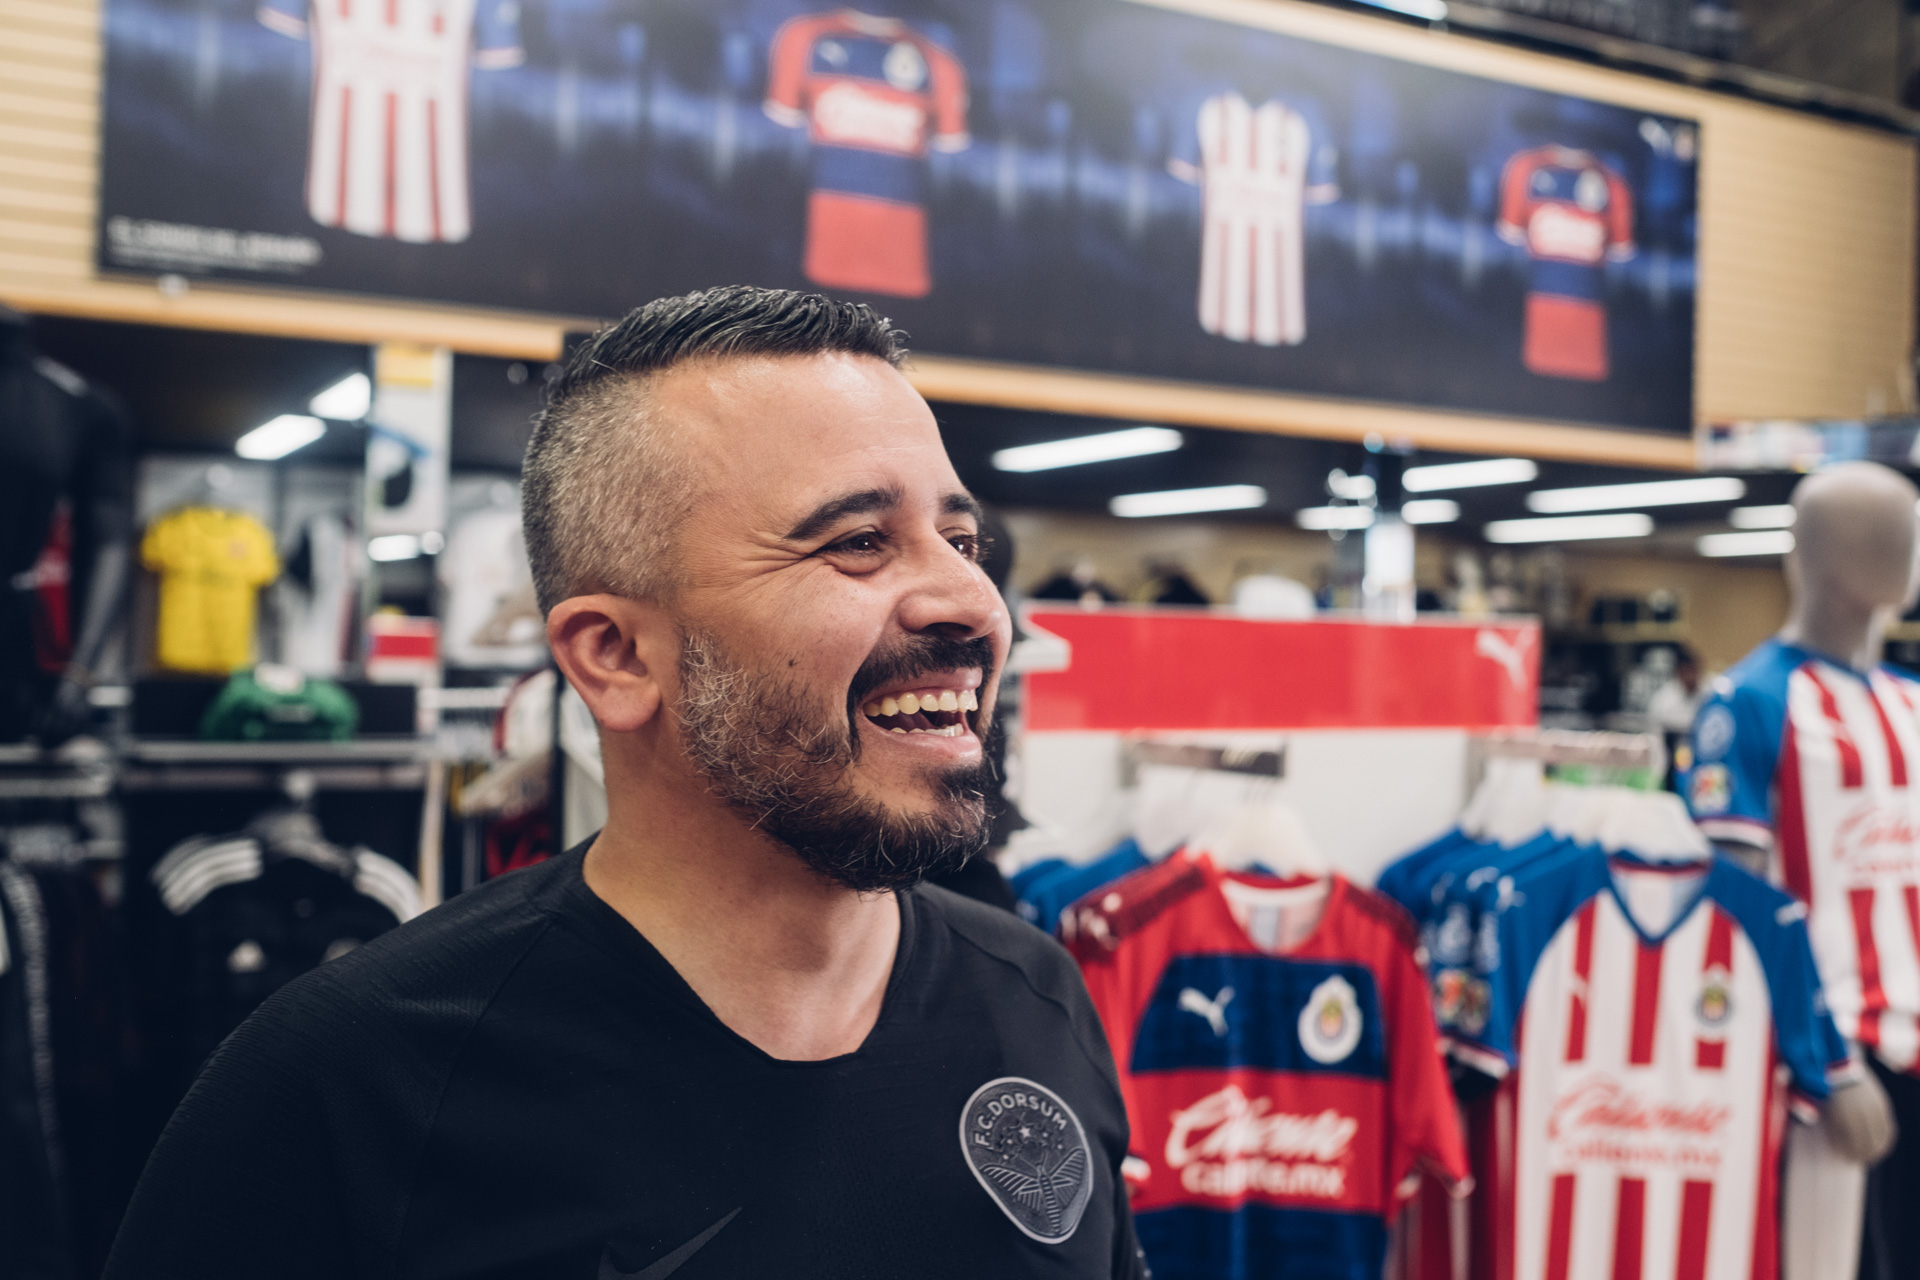 FAMILY BUSINESS: NIKY'S SPORTS WITH LUIS ORELLANA - Forty-One Magazine